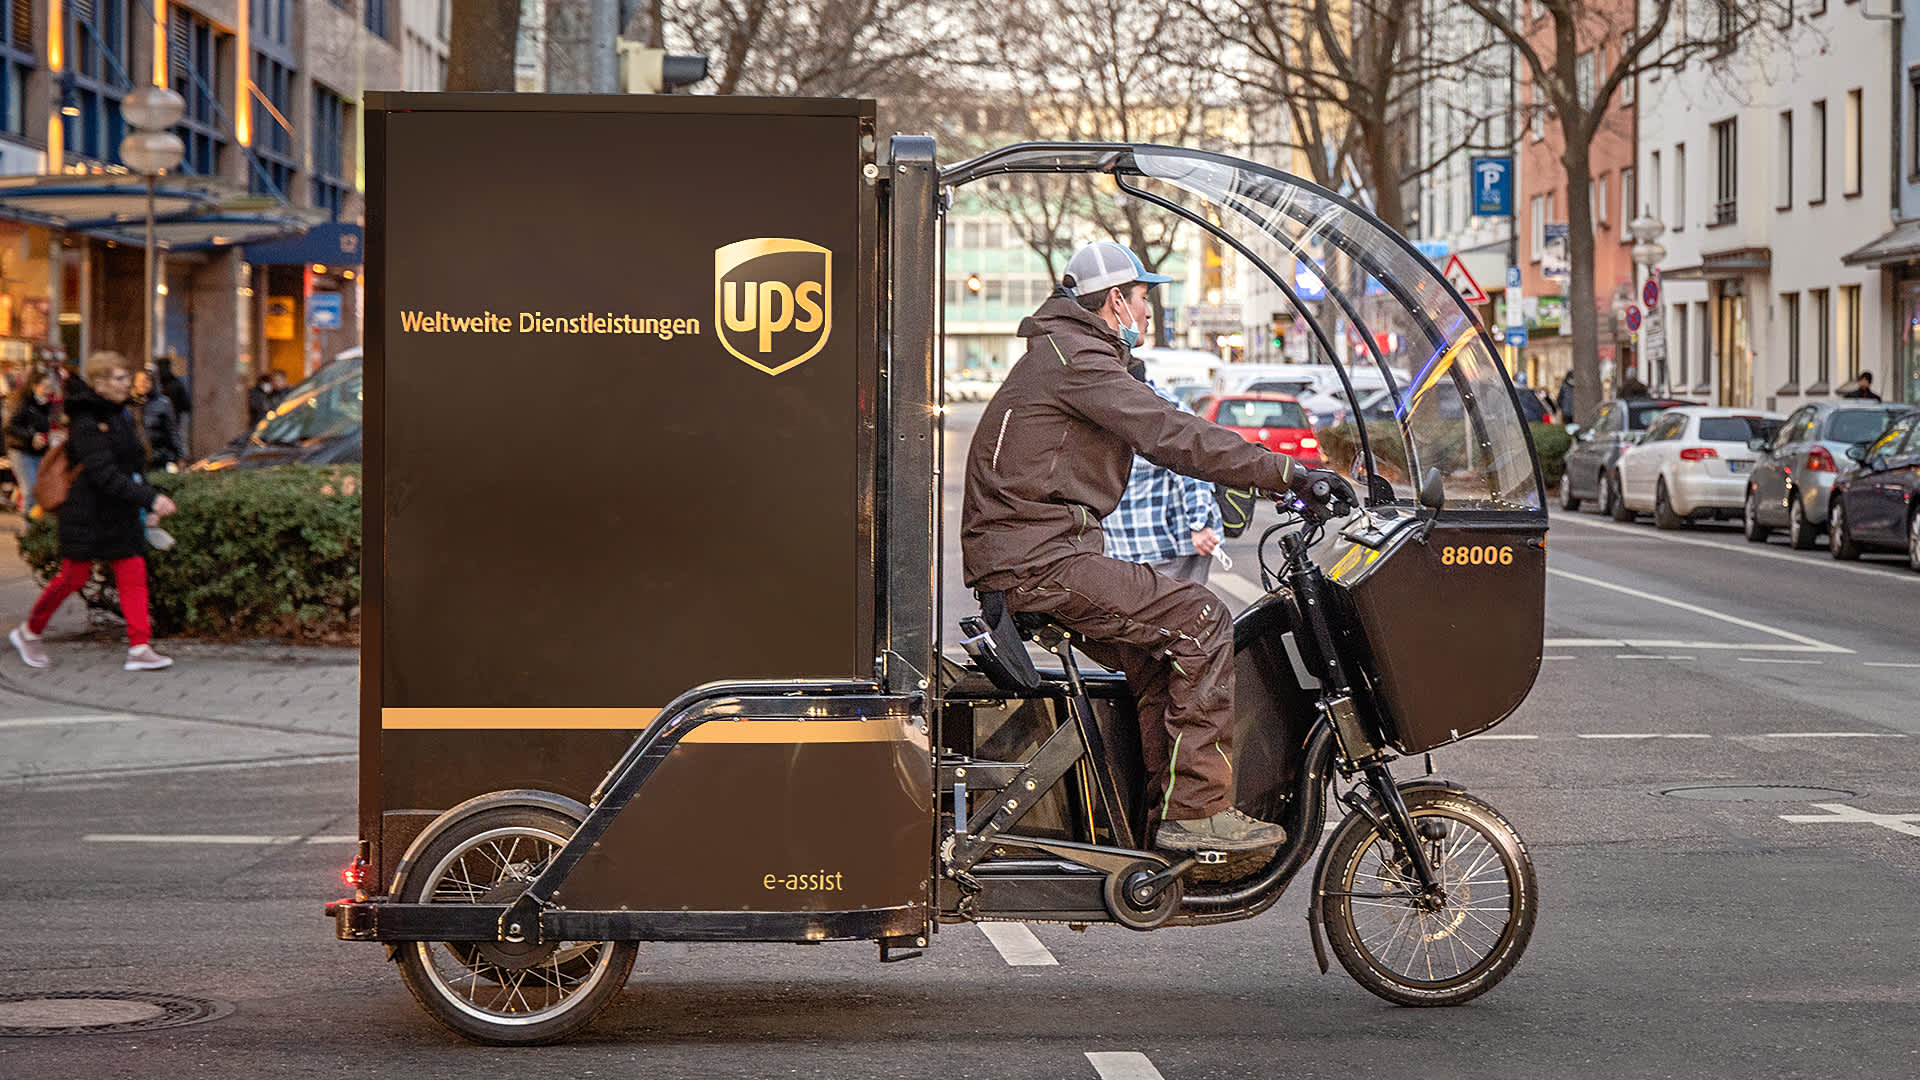 Can cargo e-bikes replace delivery trucks and vans?